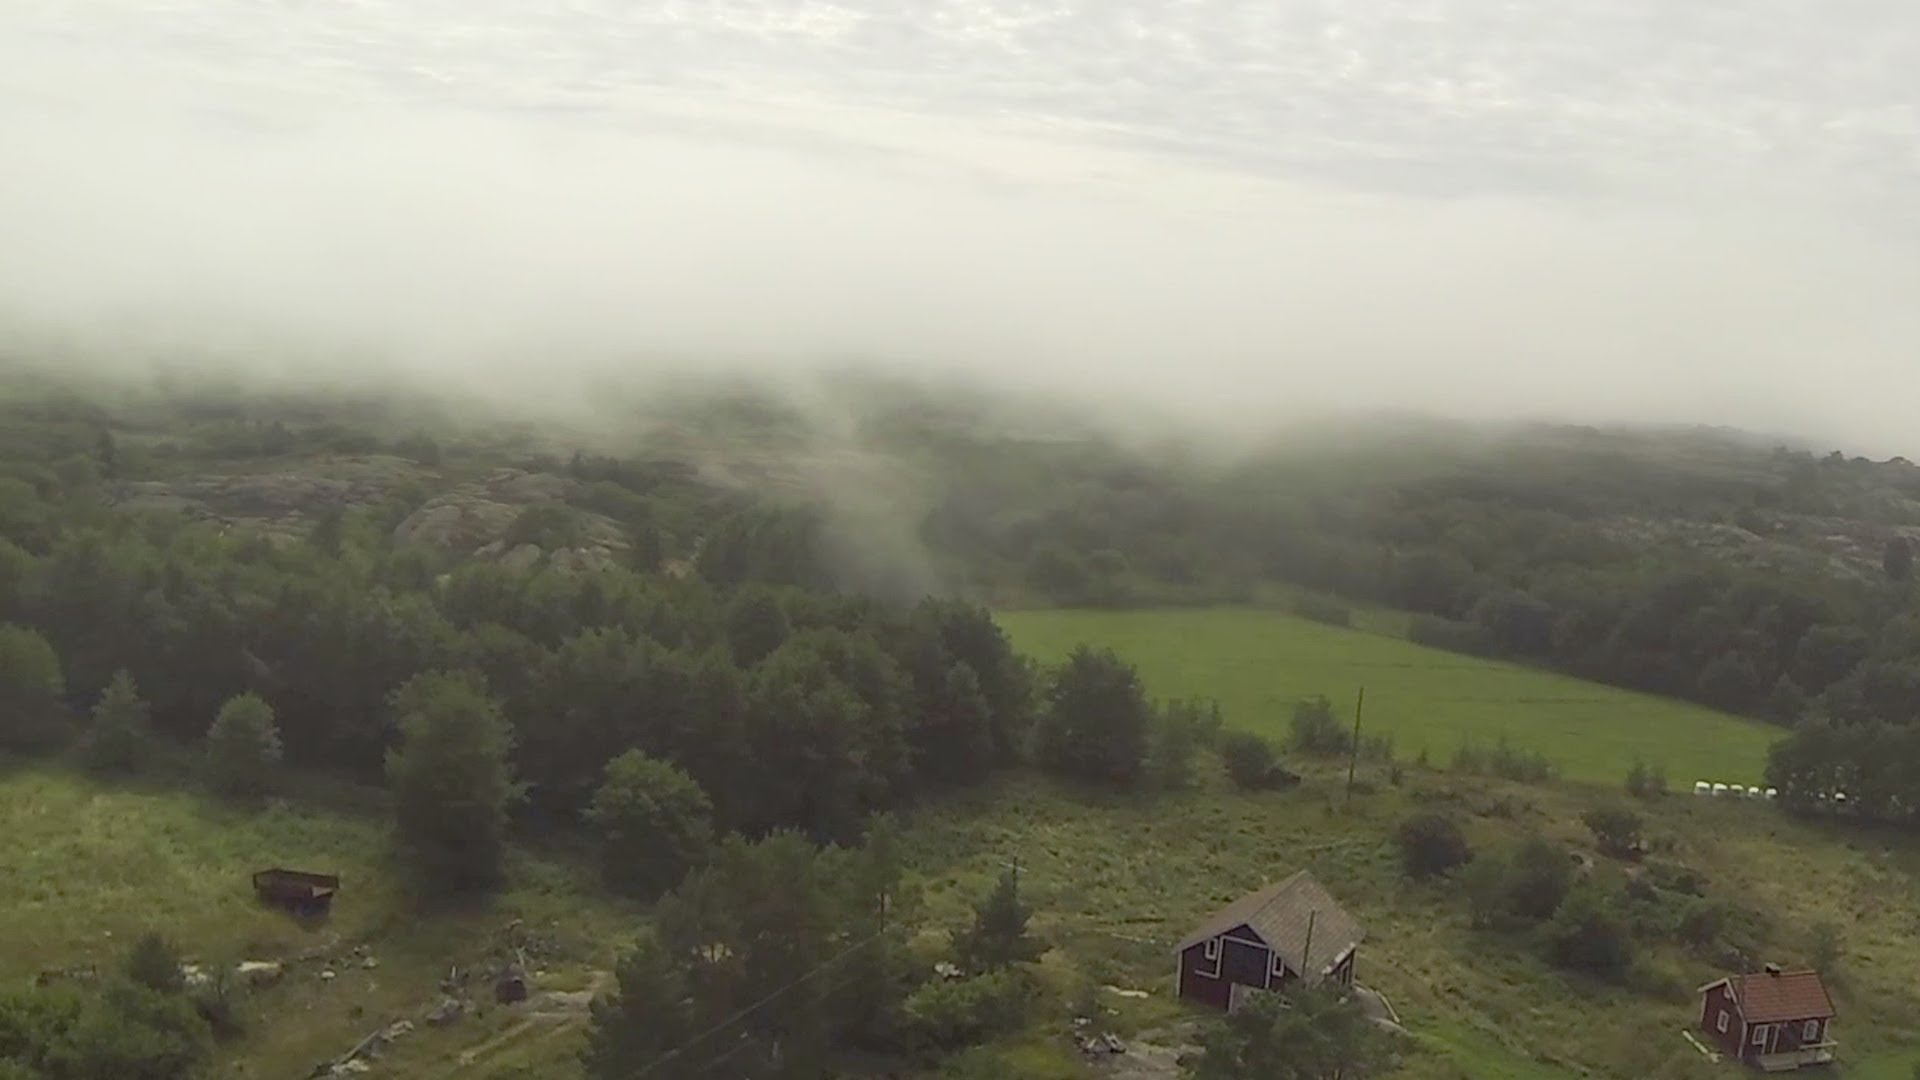 Fog is rolling in - let's fly! - YouTube